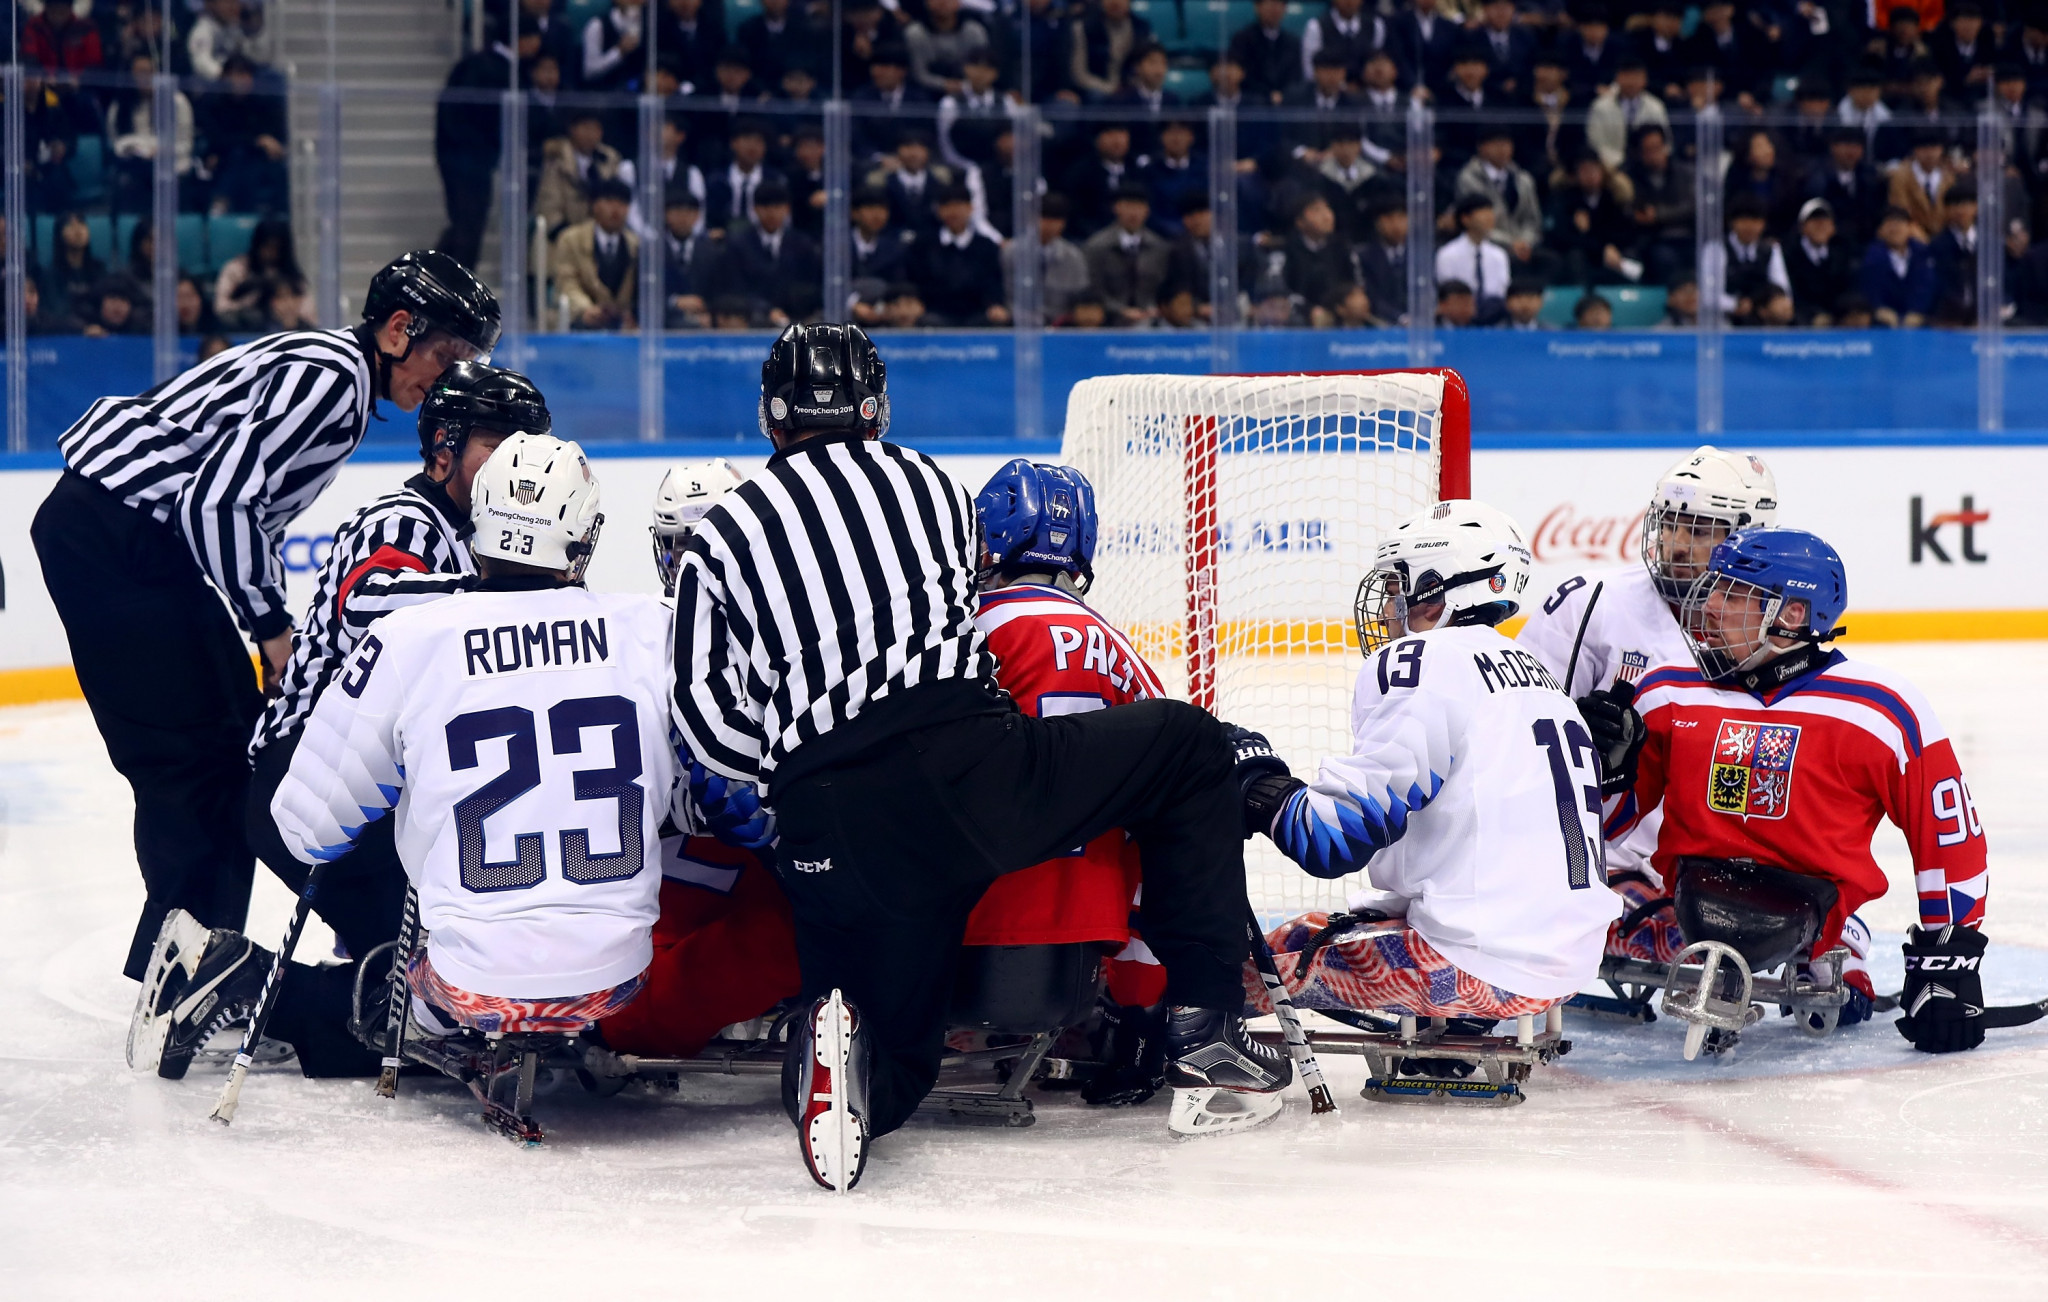 Emotions ran high as reigning Paralympic champions the US eased to a 10-0 victory over Czech Republic ©Getty Images